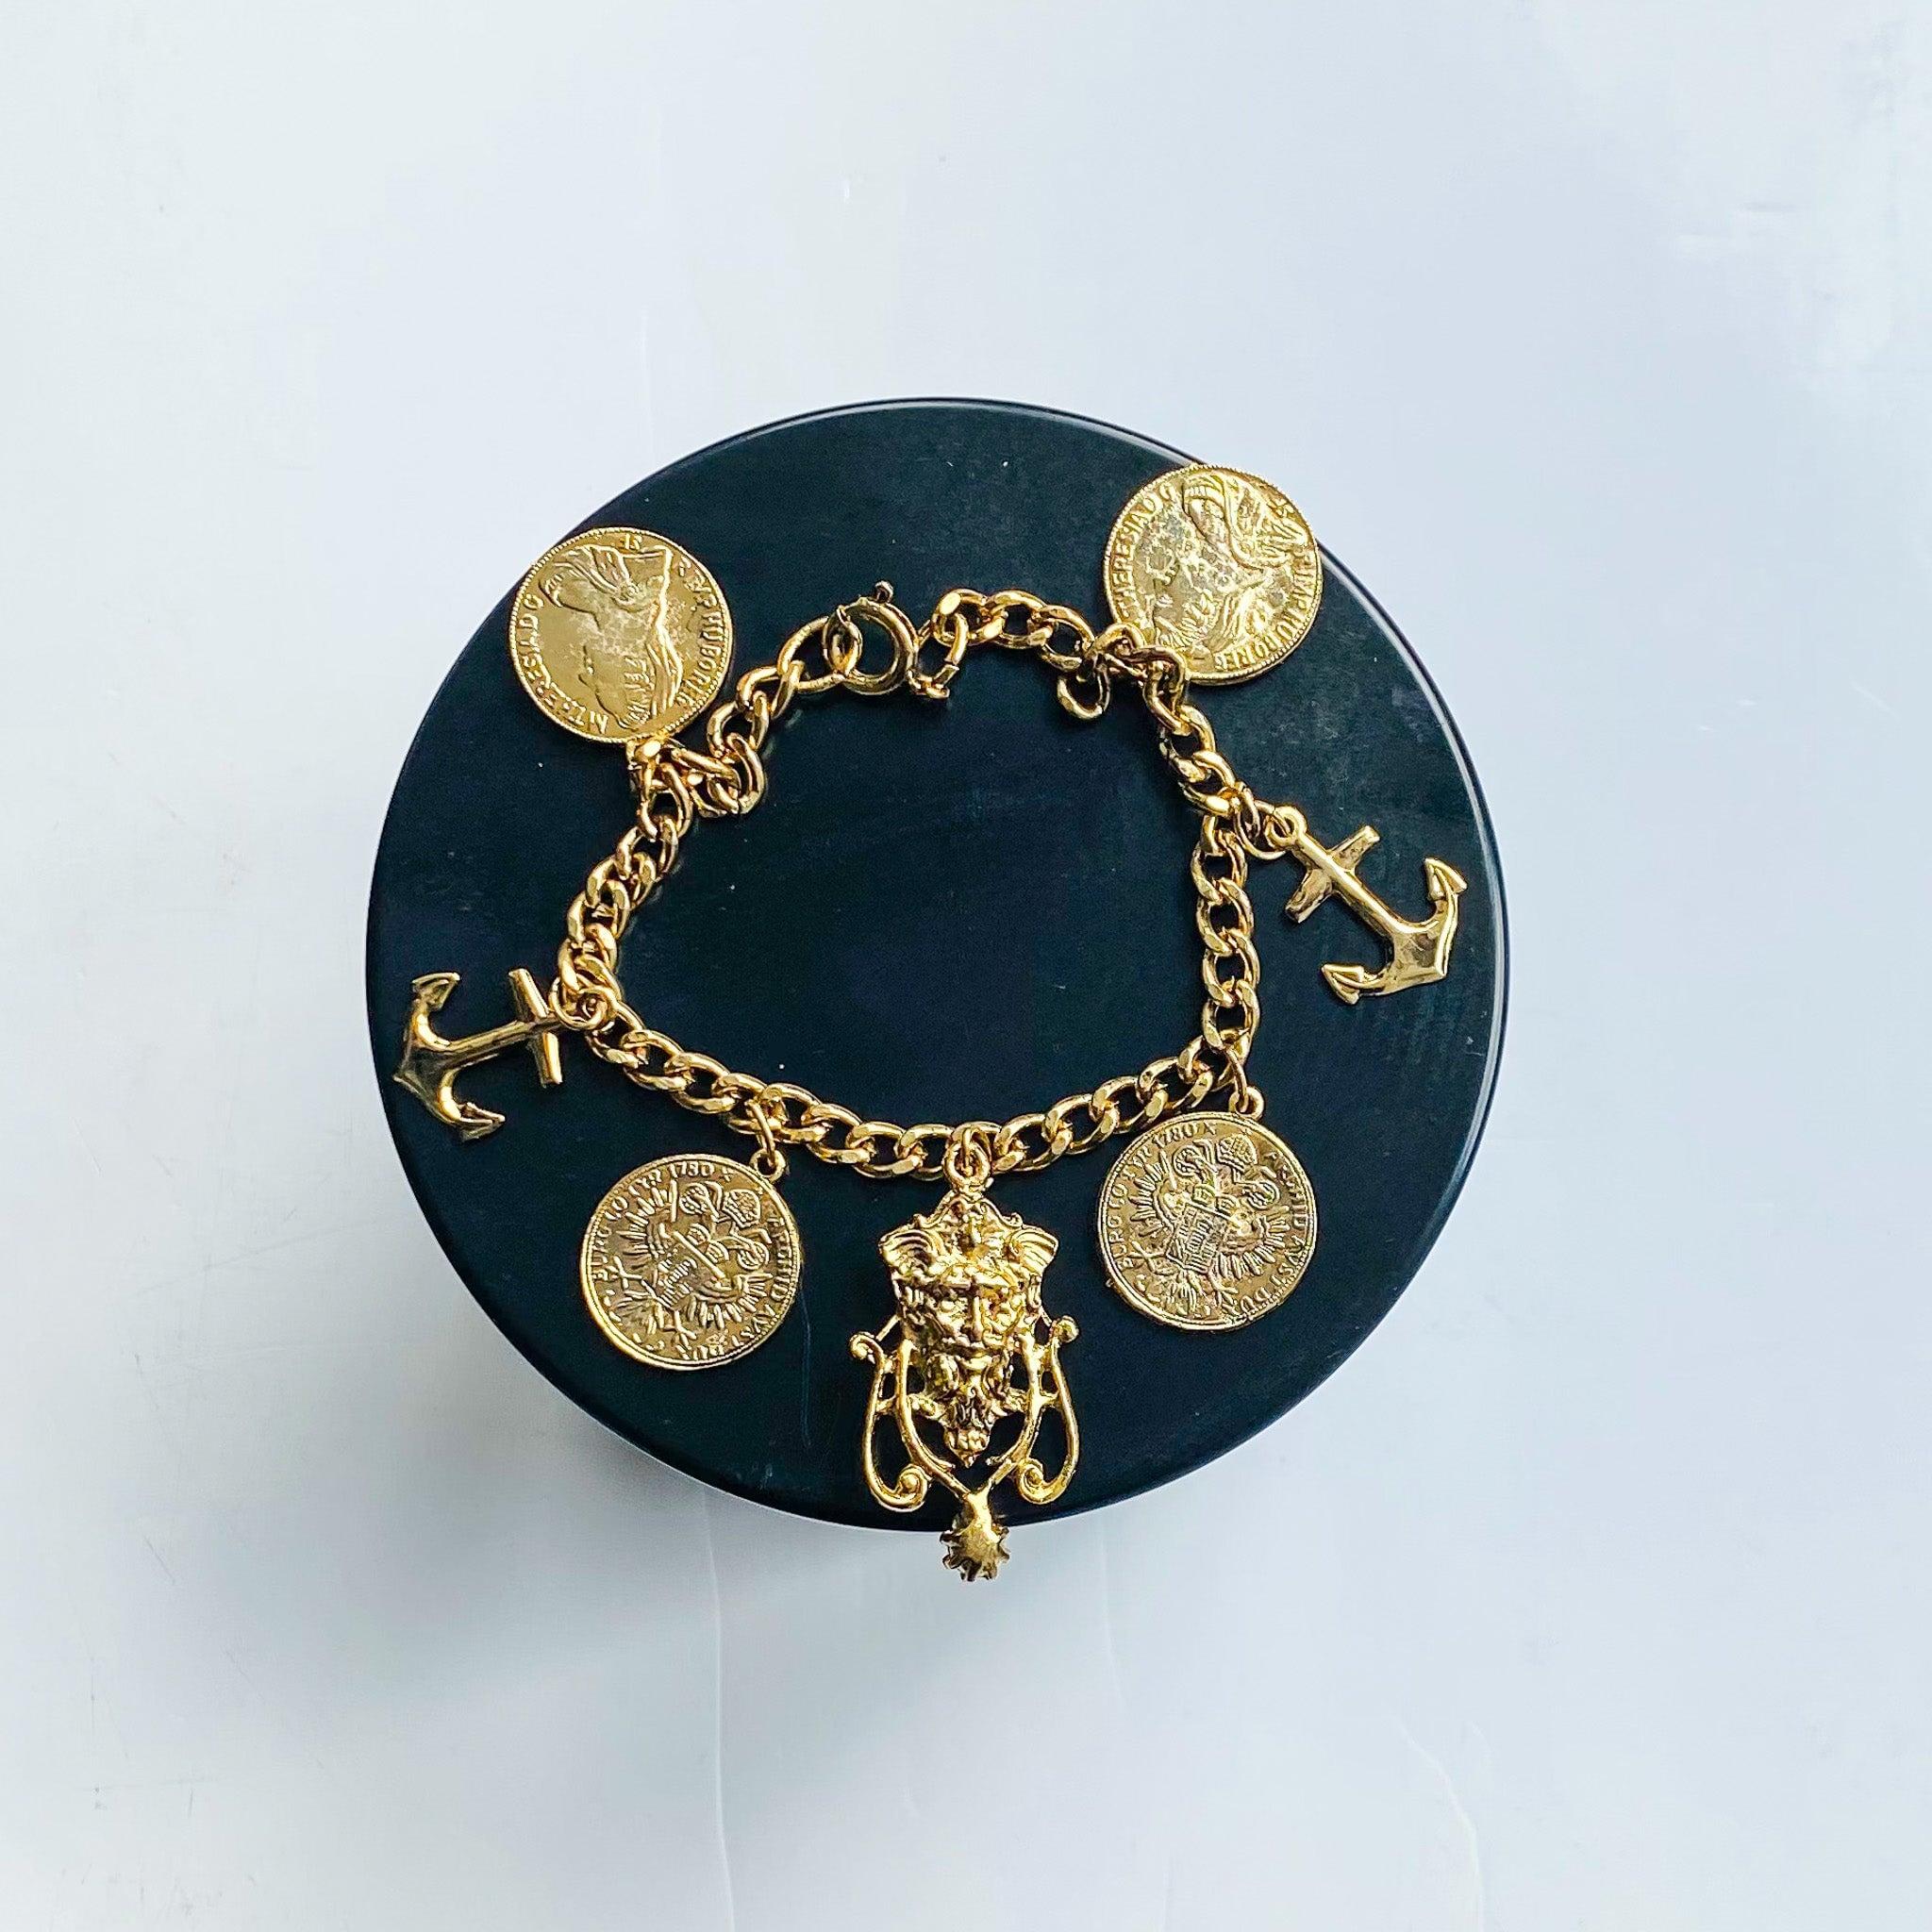 Vintage 1980s Charm Bracelet - 18 Carat Gold Plated Vintage Deadstock In New Condition For Sale In London, GB